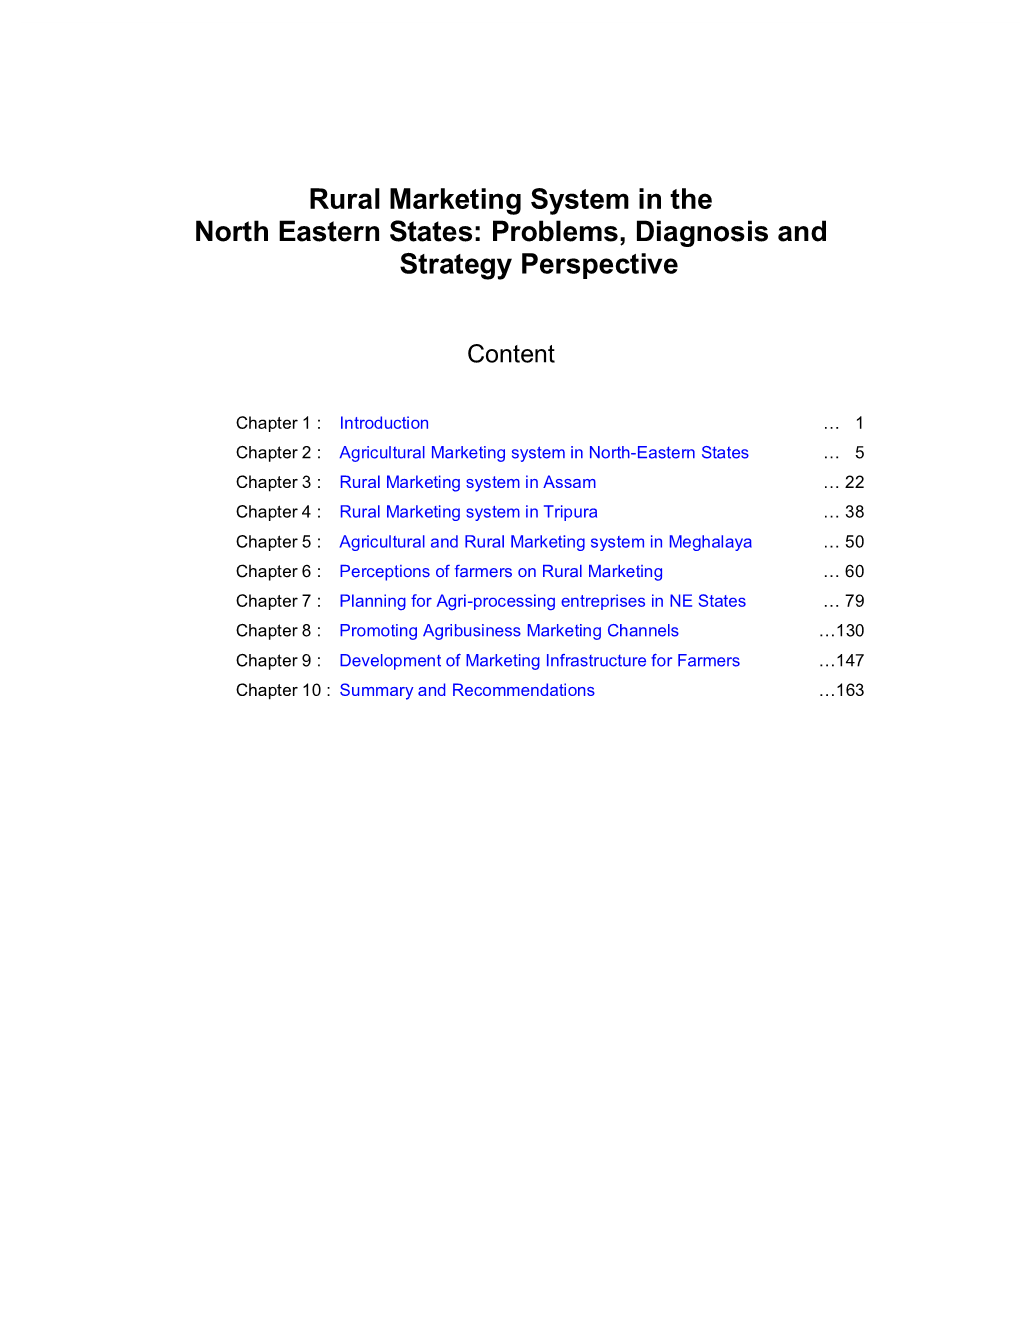 Rural Marketing System in the North Eastern States: Problems, Diagnosis and Strategy Perspective